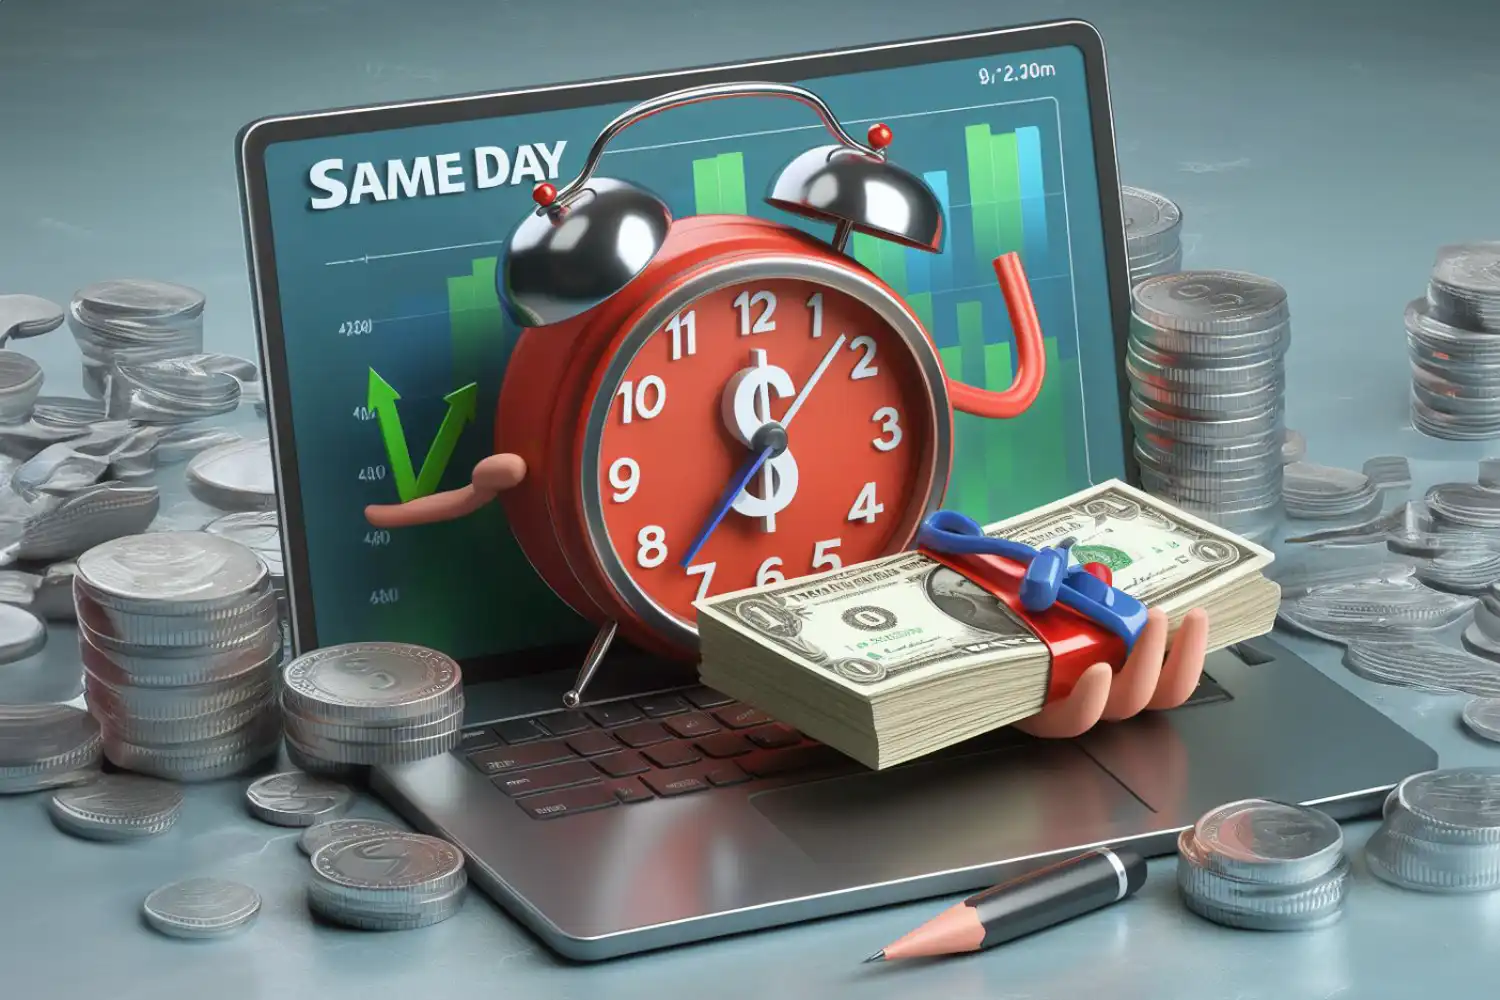 Same Day Loan: A Quick Solution to Your Financial Needs